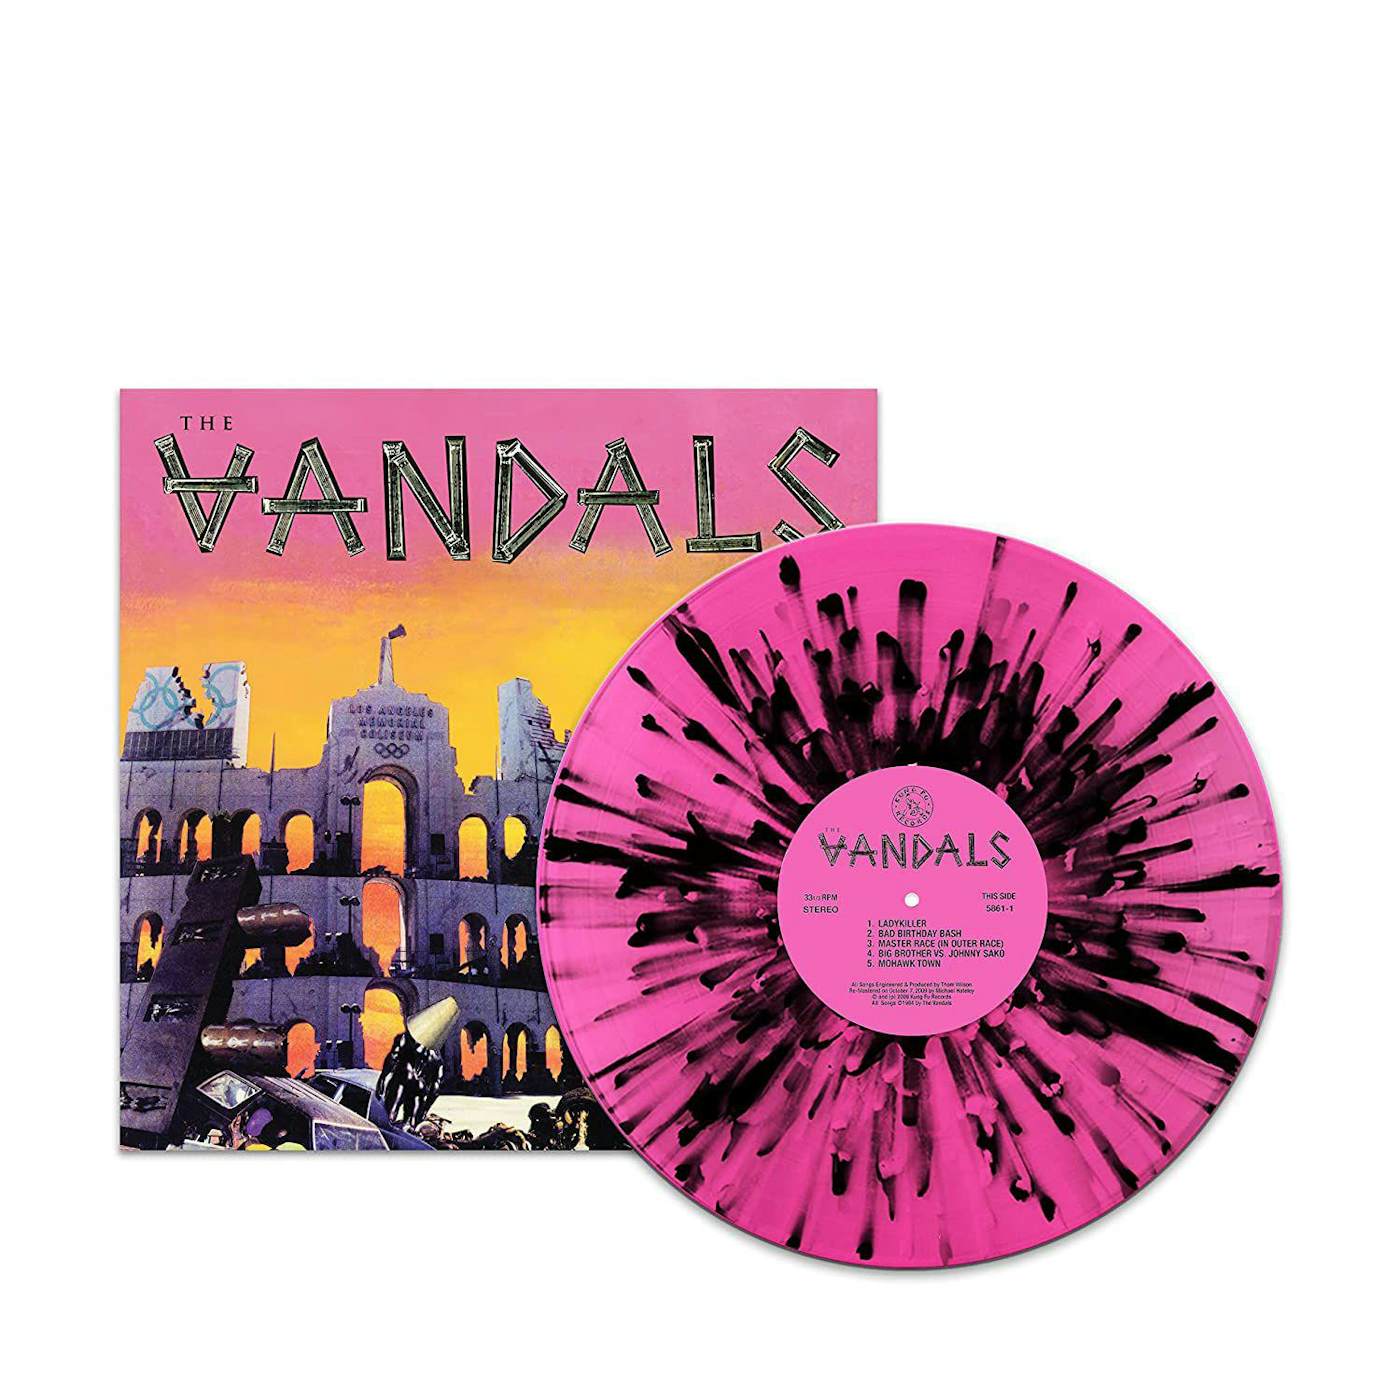 When In Rome Do As The Vandals (Pink & Black) Vinyl Record